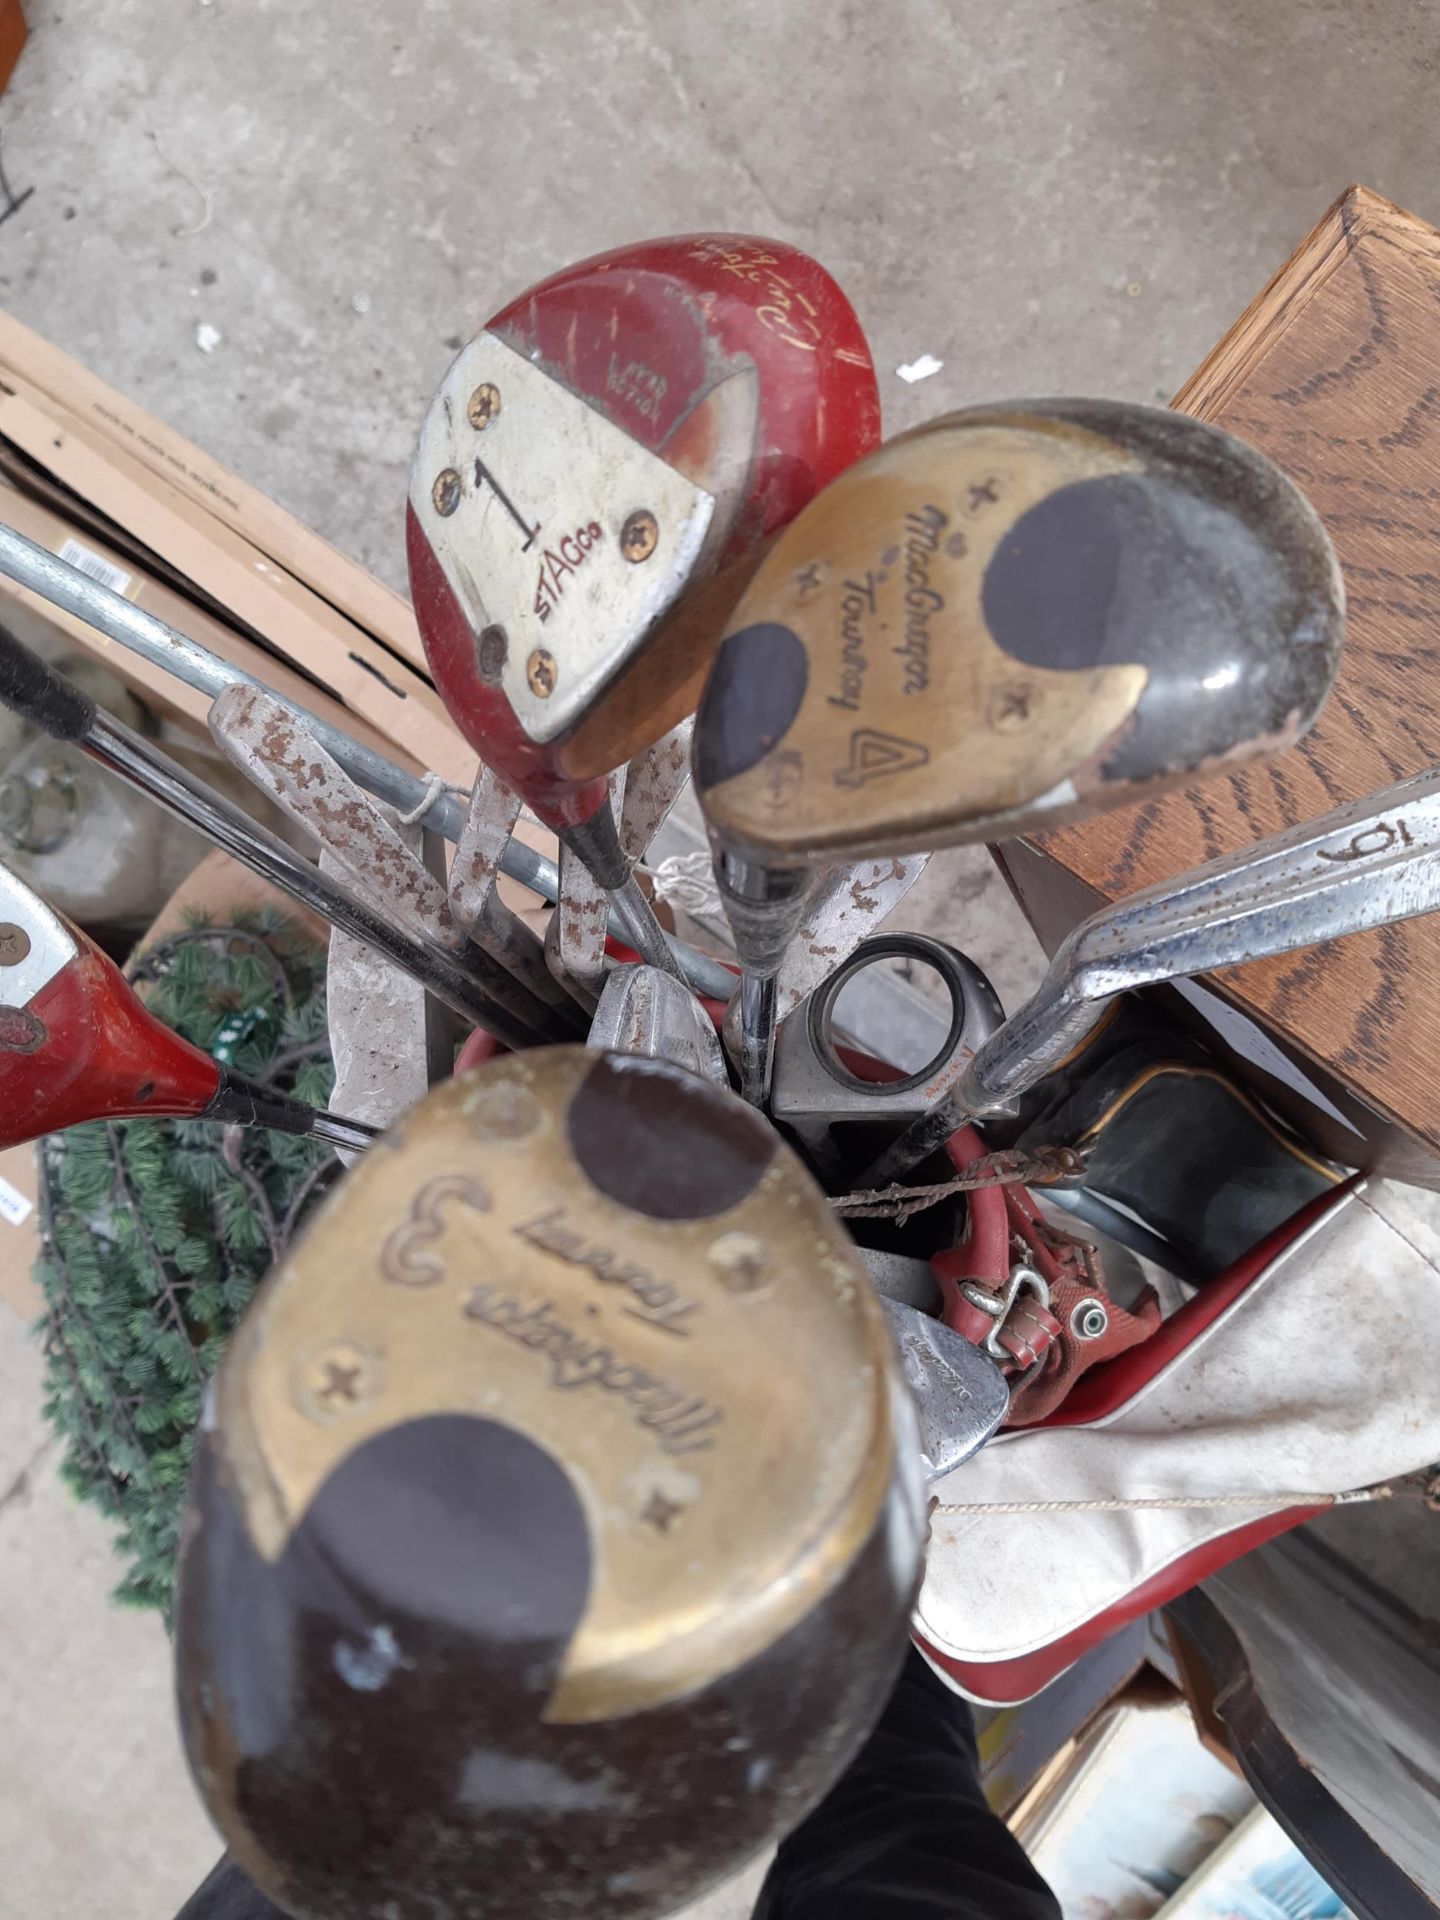 A VINTAGE GOLF BAG AND AN ASSORTMENT OF VINTAGE GOLF CLUBS ETC - Image 4 of 4